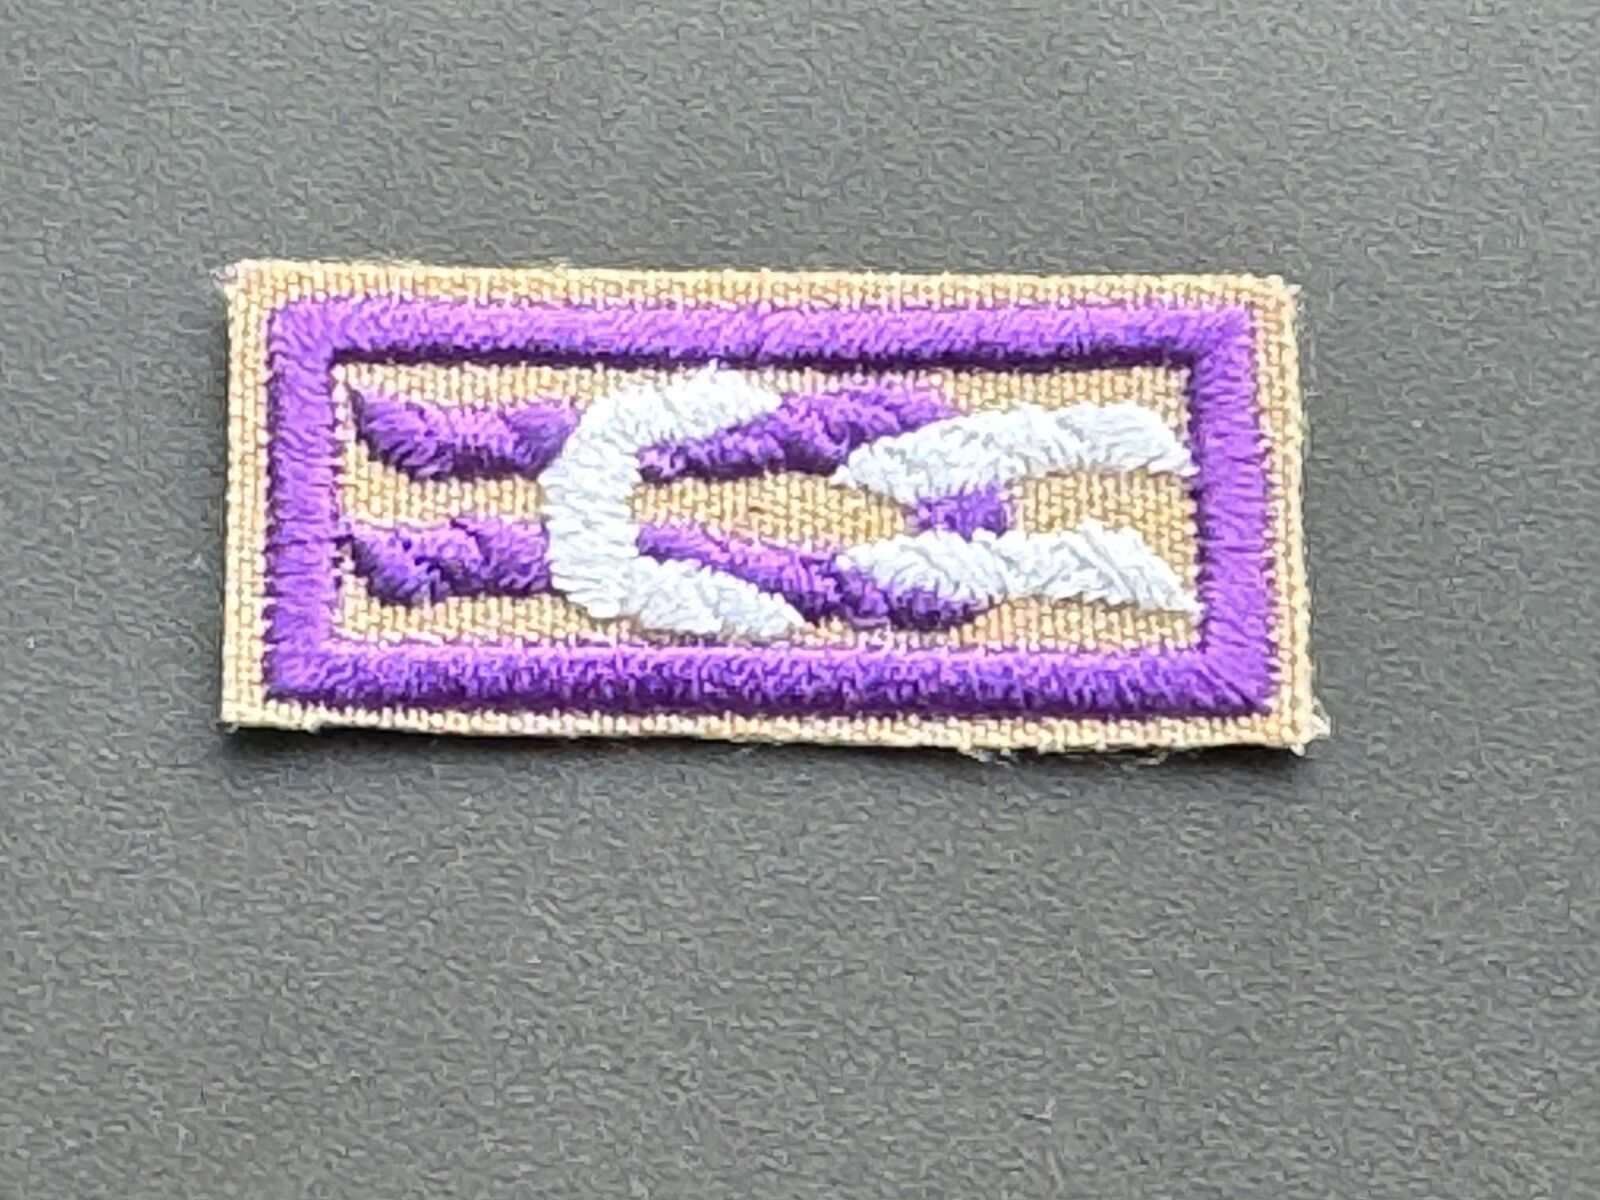 BSA, Vintage International Scouters Award Square Knot Award Patch (2003-2013)